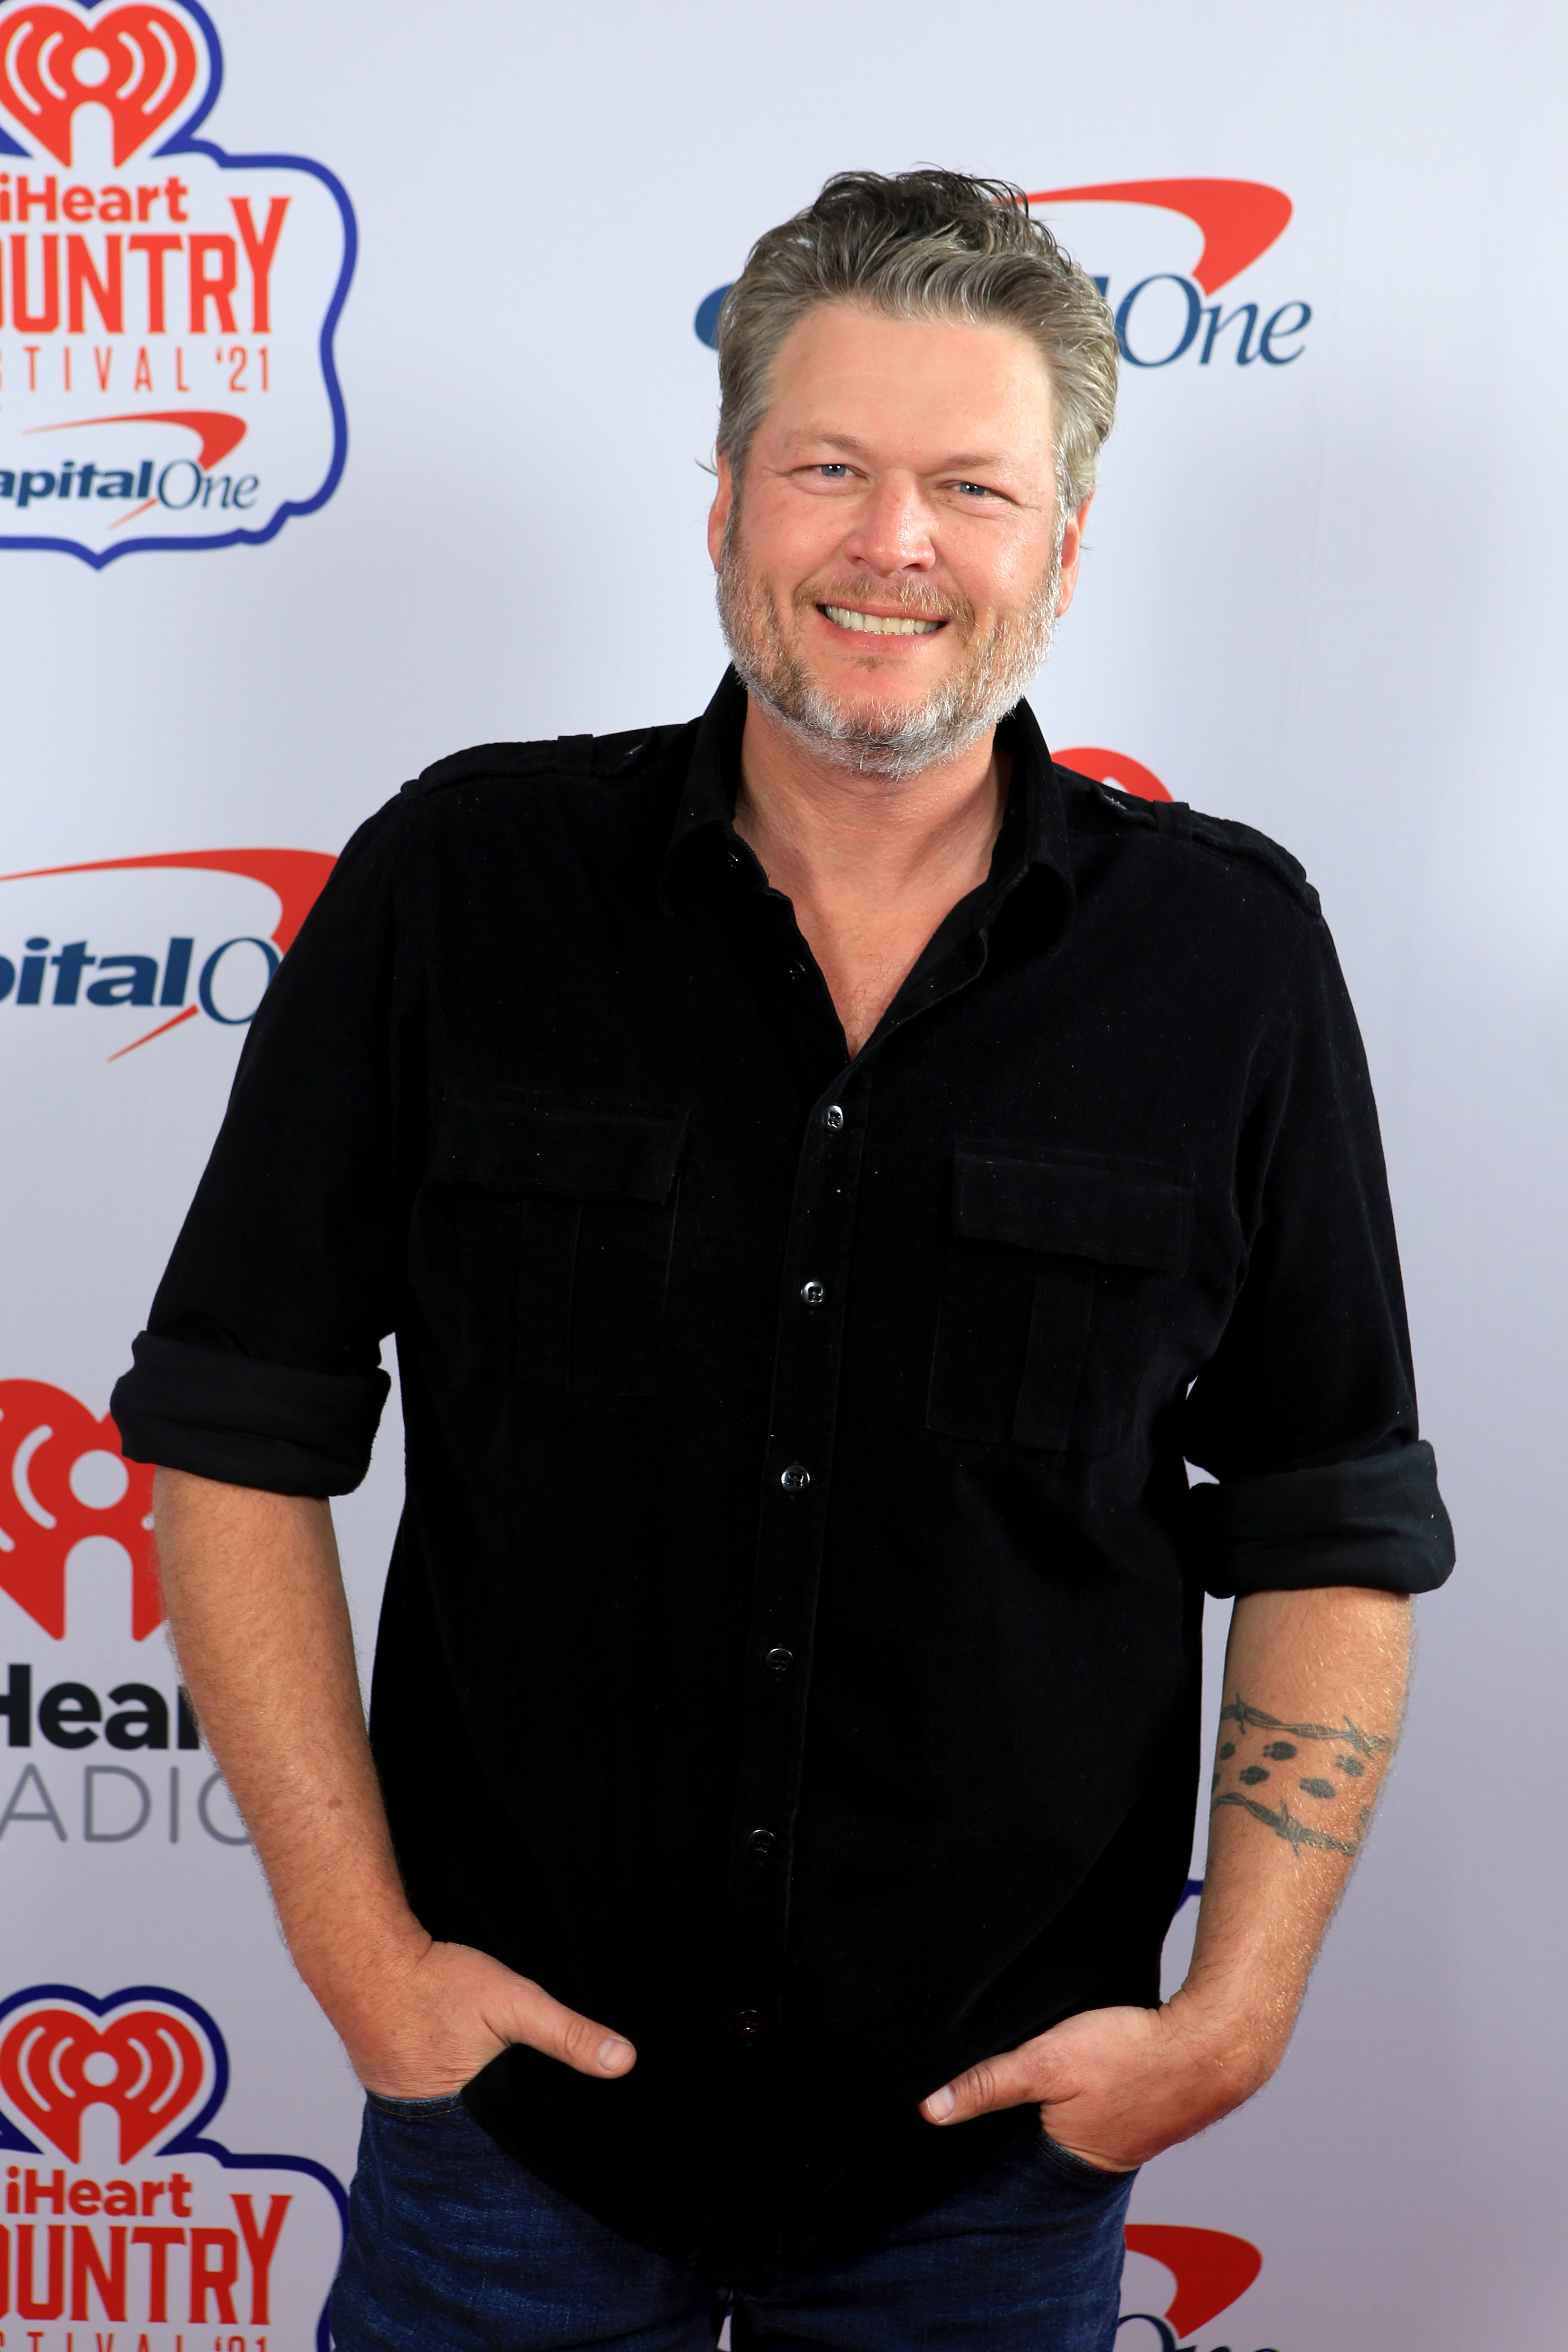 Blake Shelton poses backstage during the 2021 iHeartCountry Festival Presented By Capital One at The Frank Erwin Center on October 30, 2021, in Austin, Texas. | Source: Getty Images